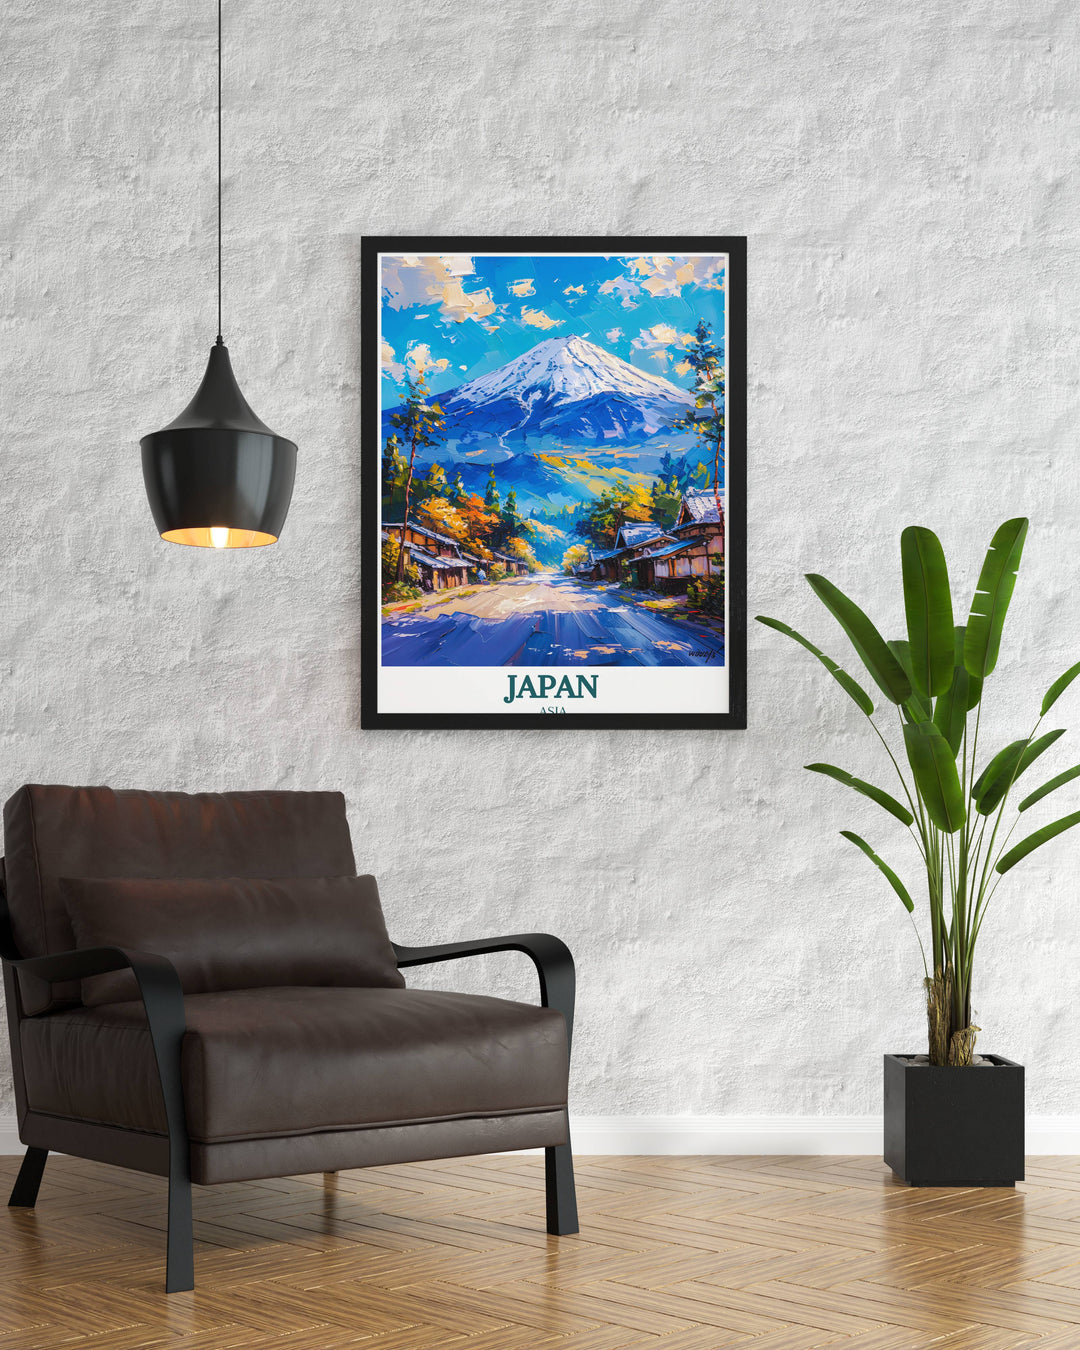 Tokyo travel gift featuring Japans iconic landmark, Mount Fuji, a thoughtful present for art enthusiasts.